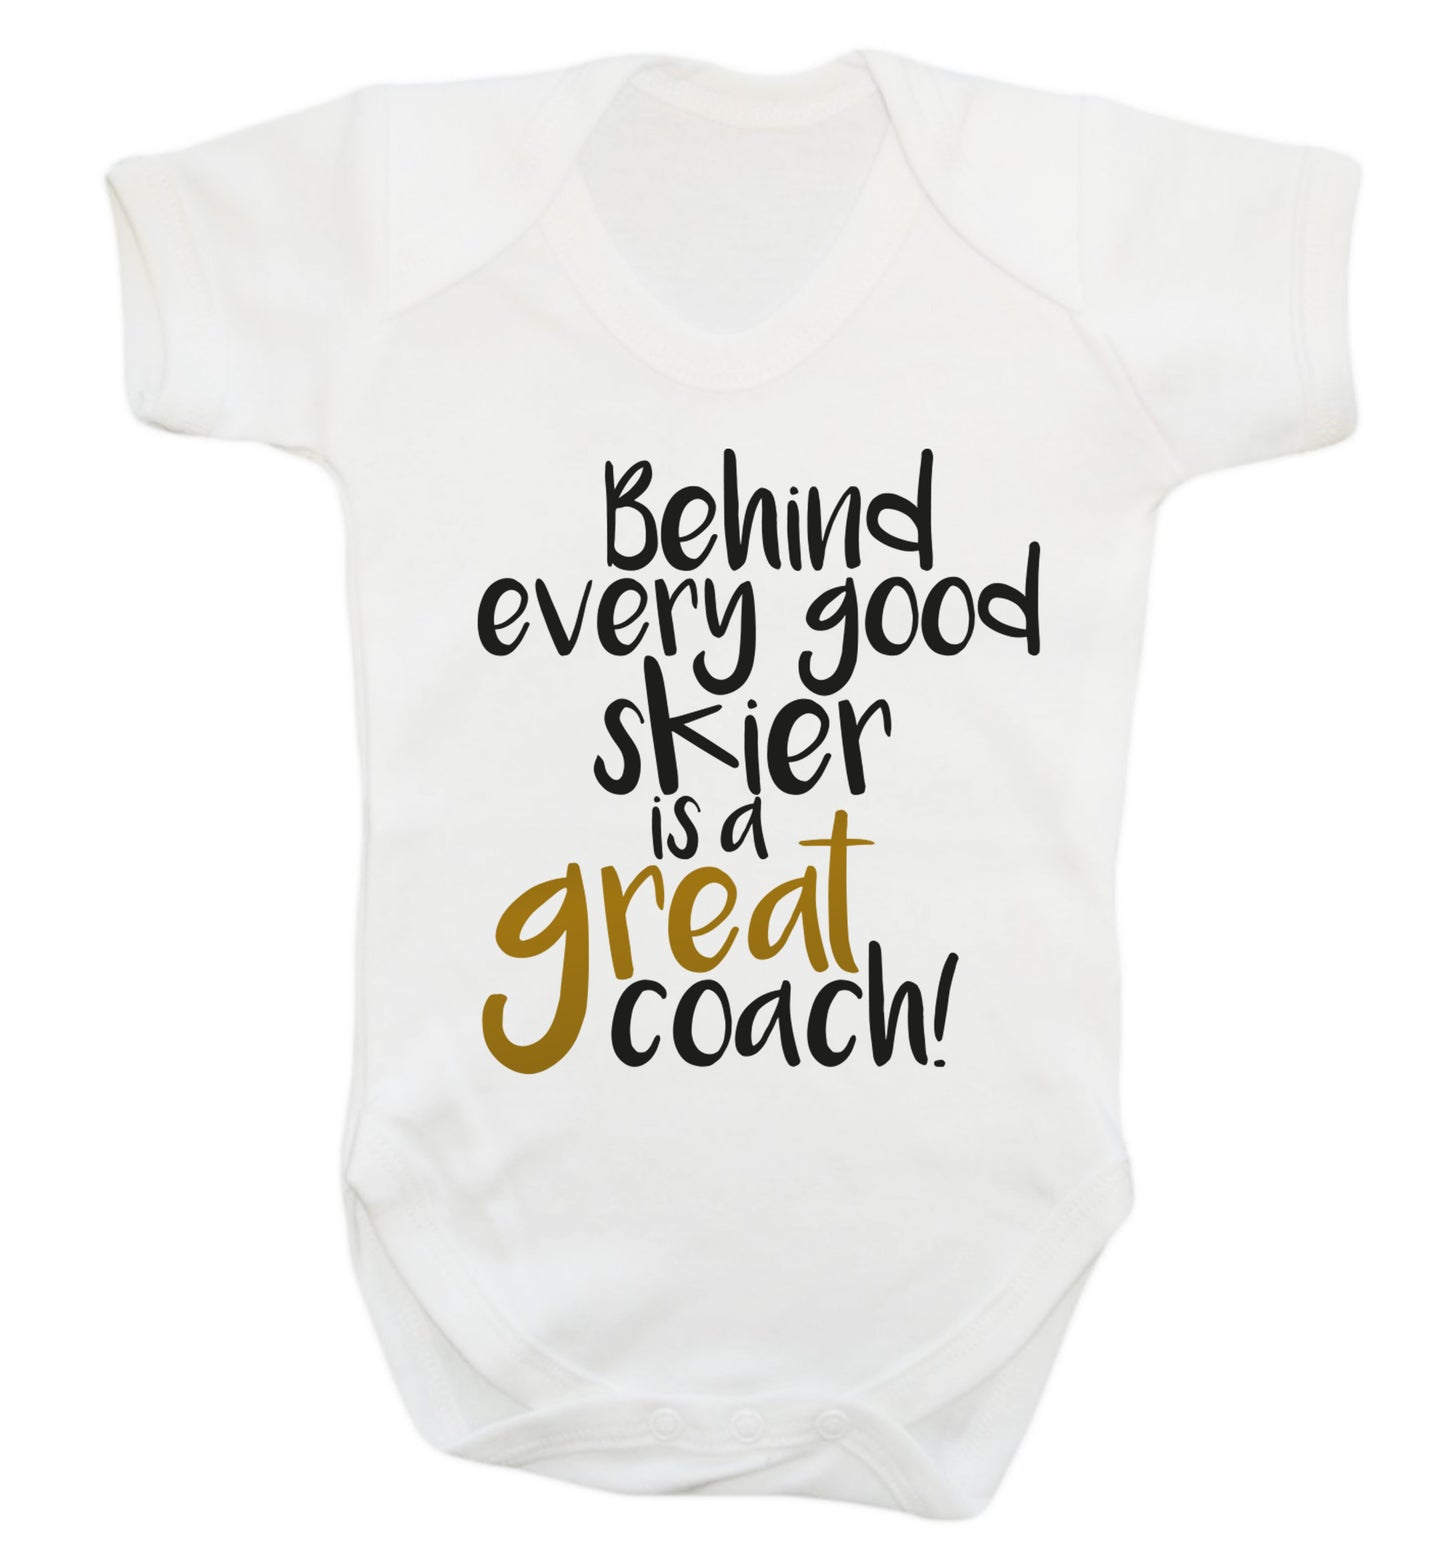 Behind every good skier is a great coach! Baby Vest white 18-24 months